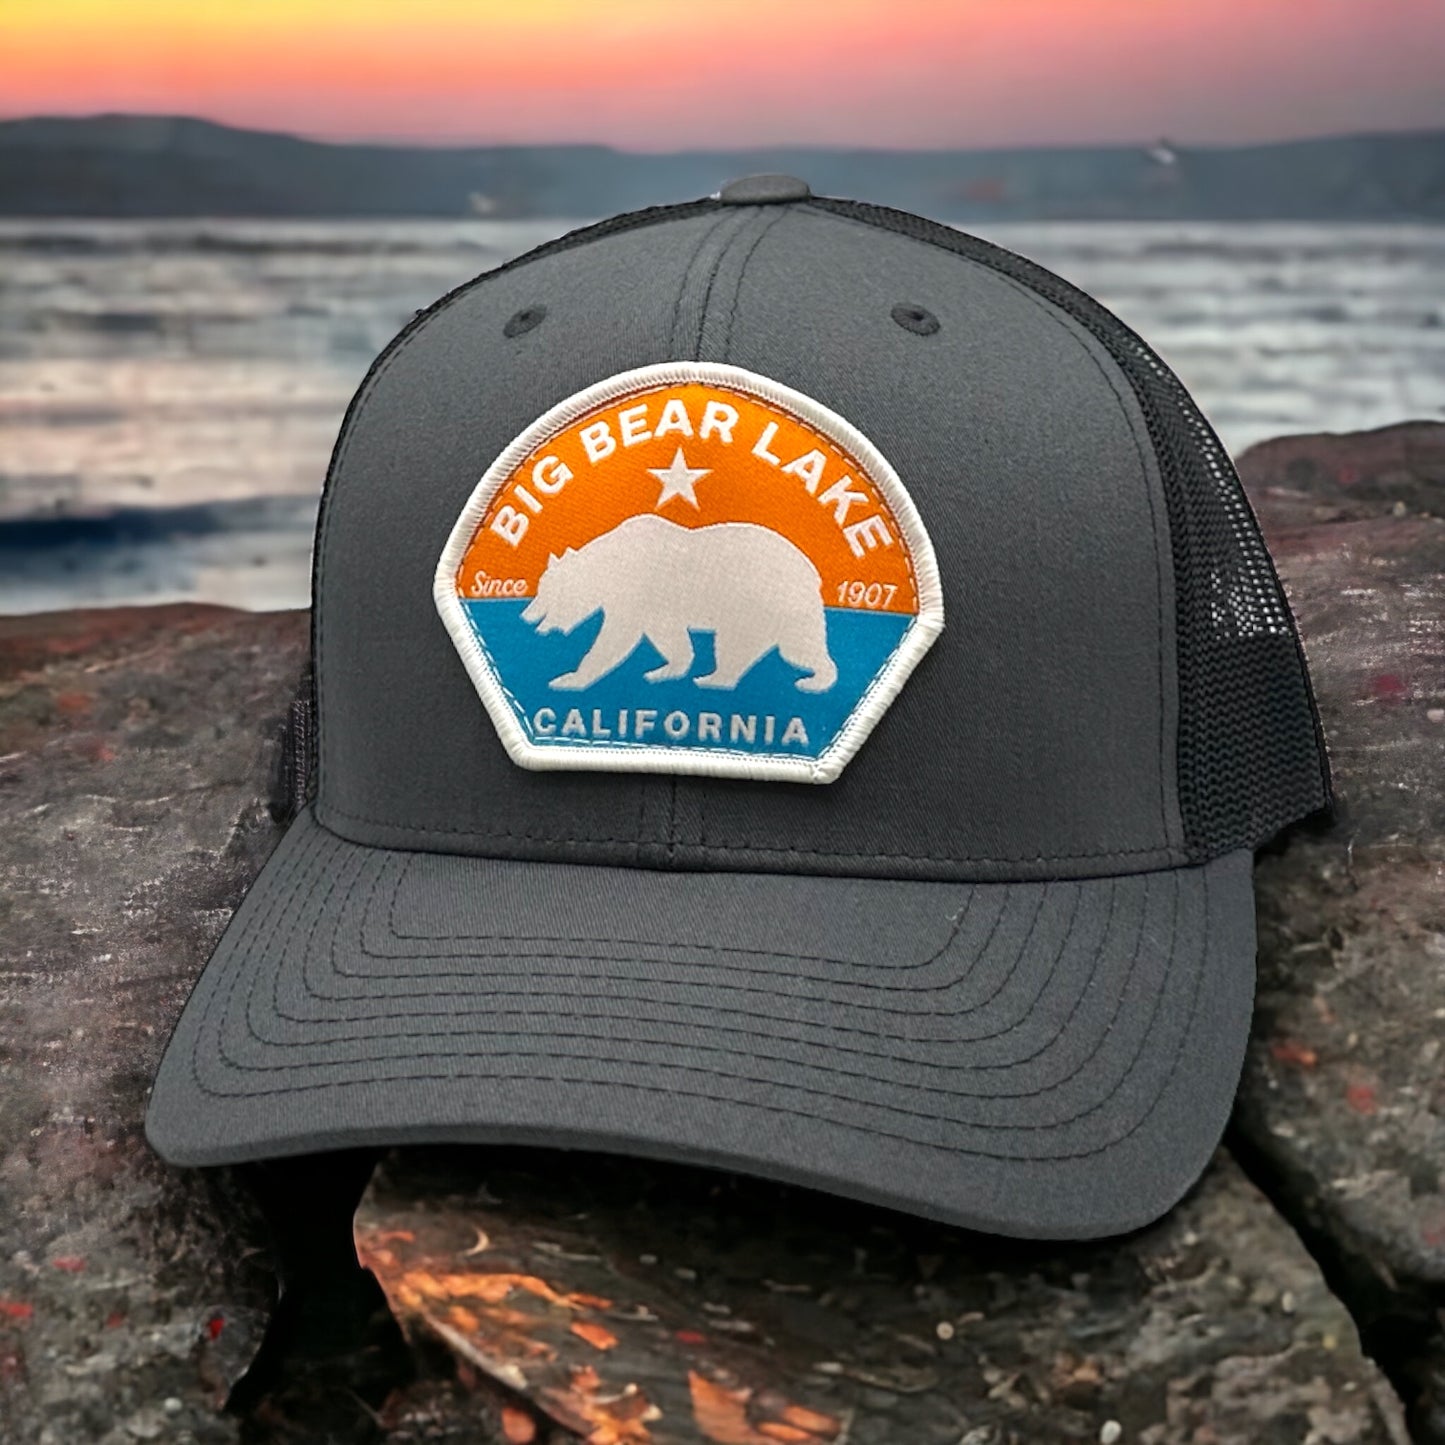 Orange and blue themed logo with a bear on a grey trucker hat